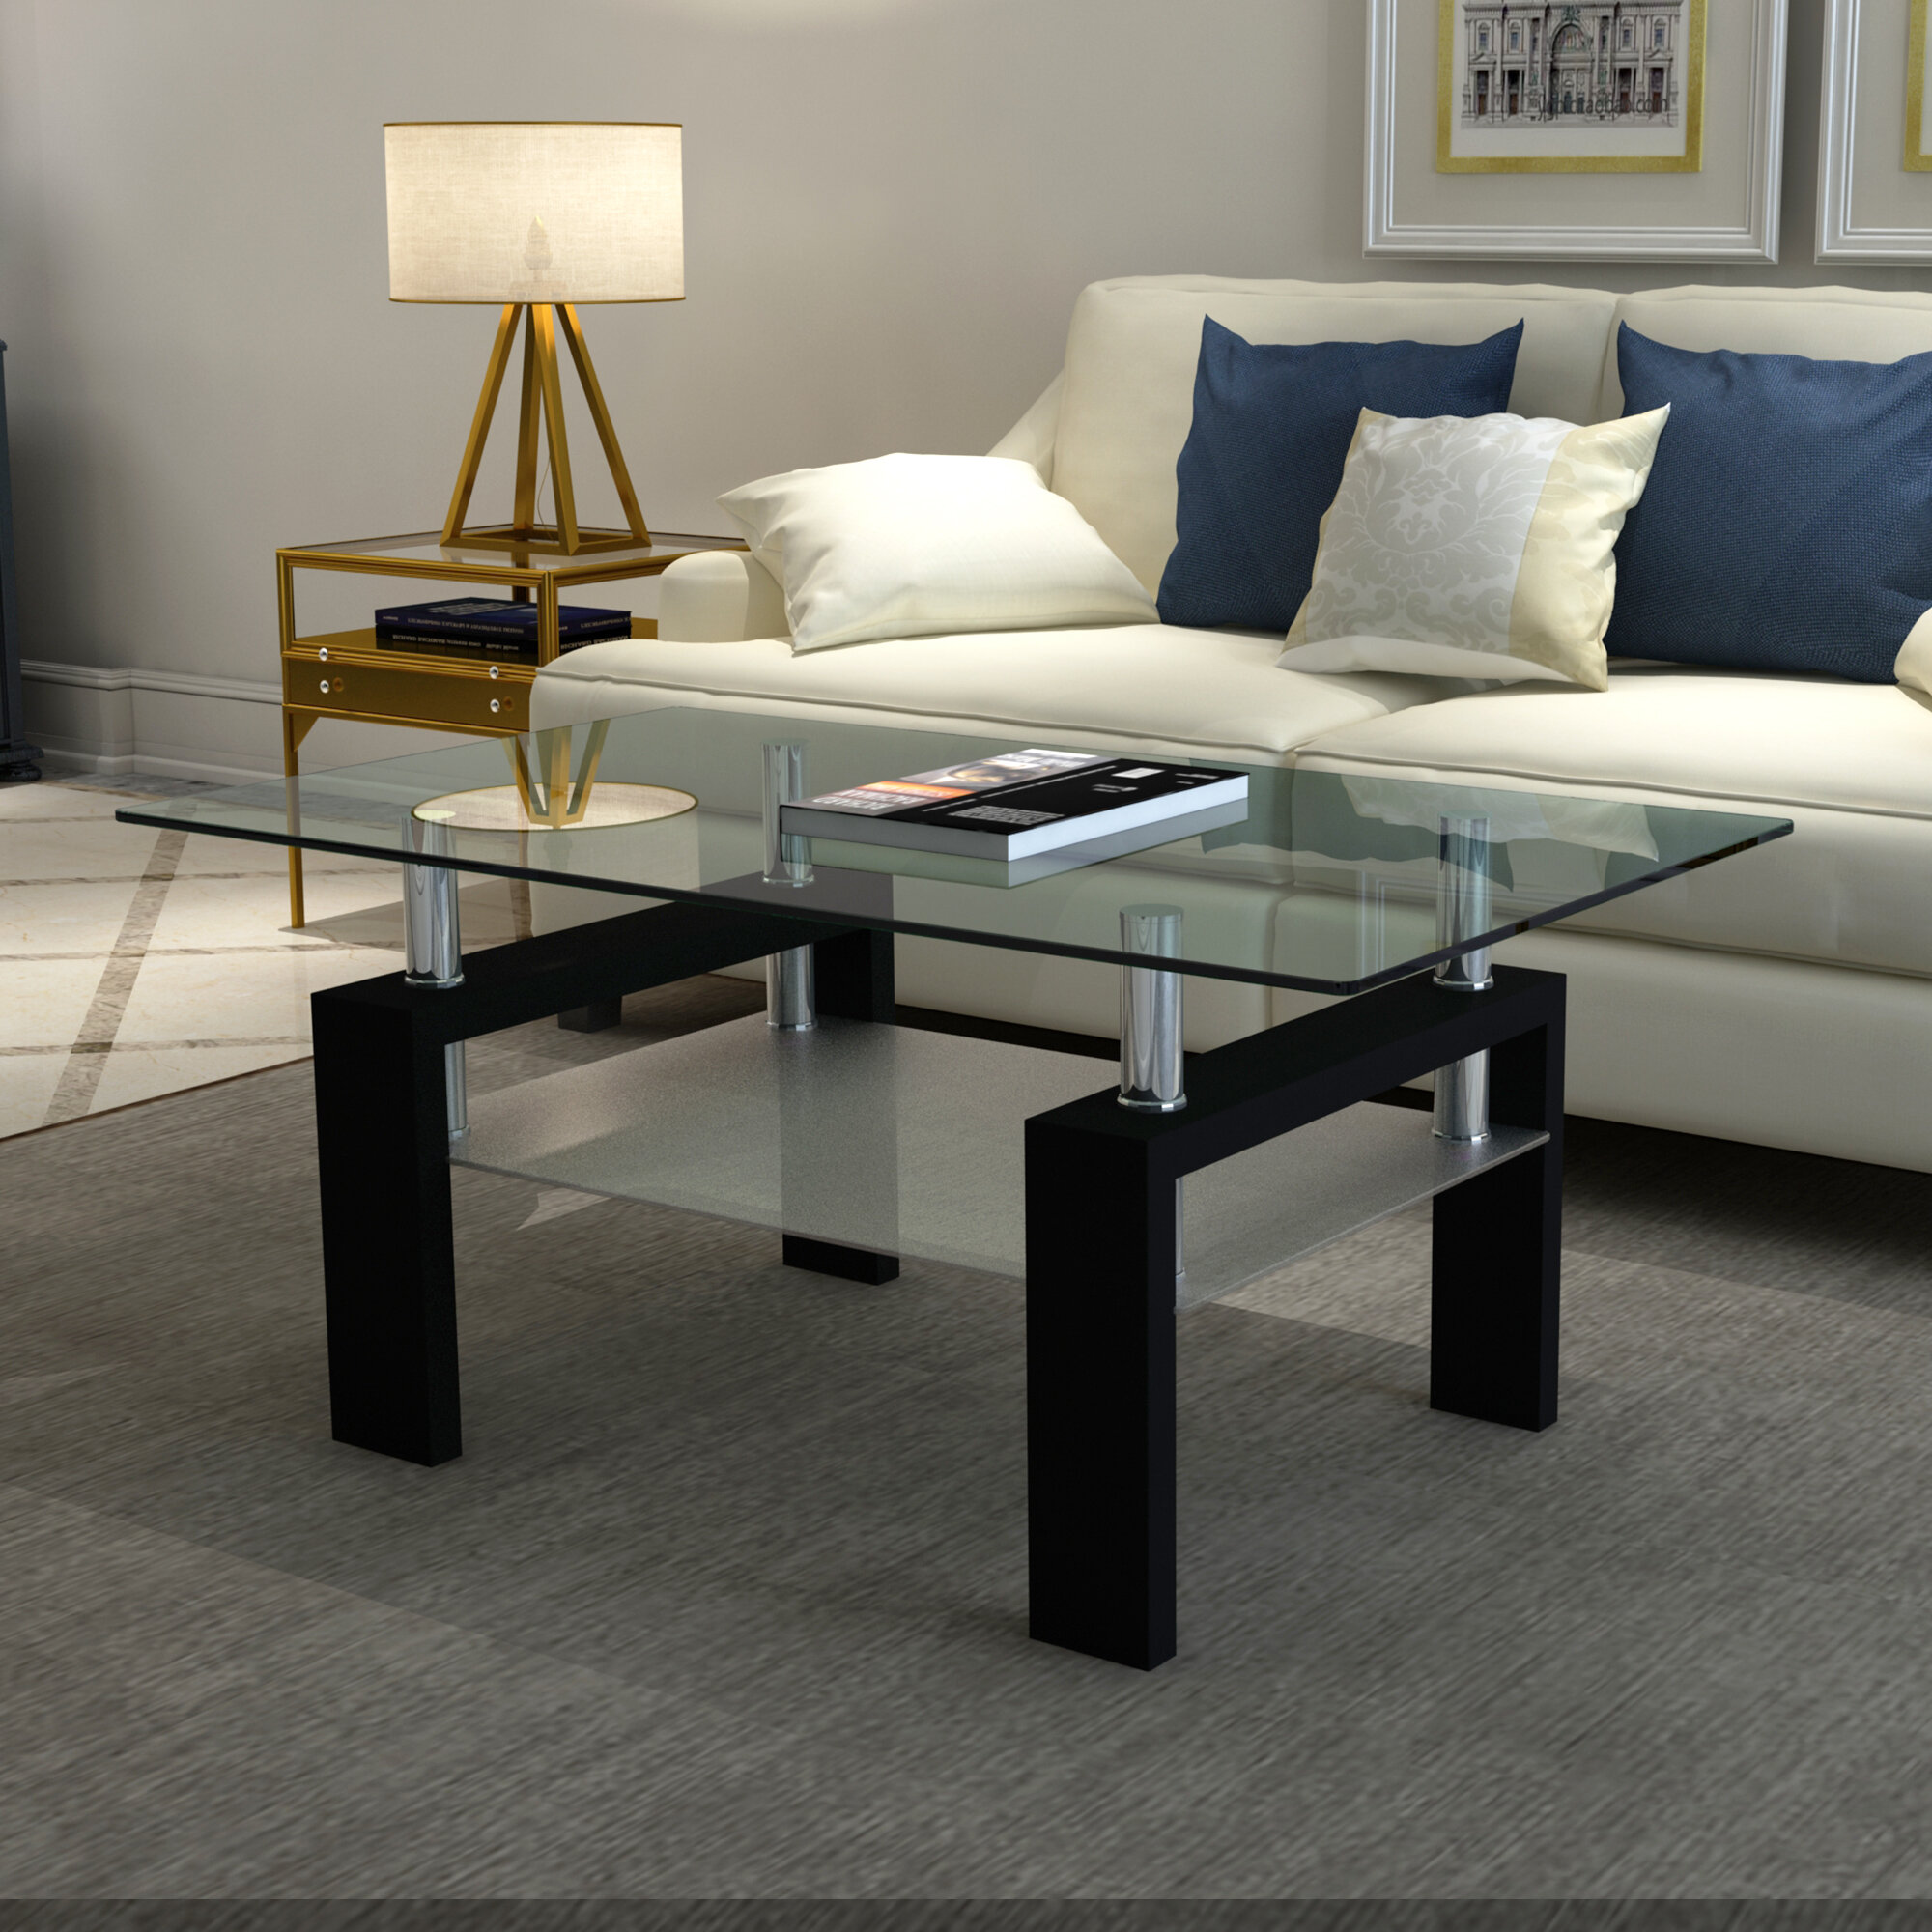 Mirrored Coffee Tables for Living Room Modern Accent Tea Table Sofa Desk with 1 Drawer Easy Assembly